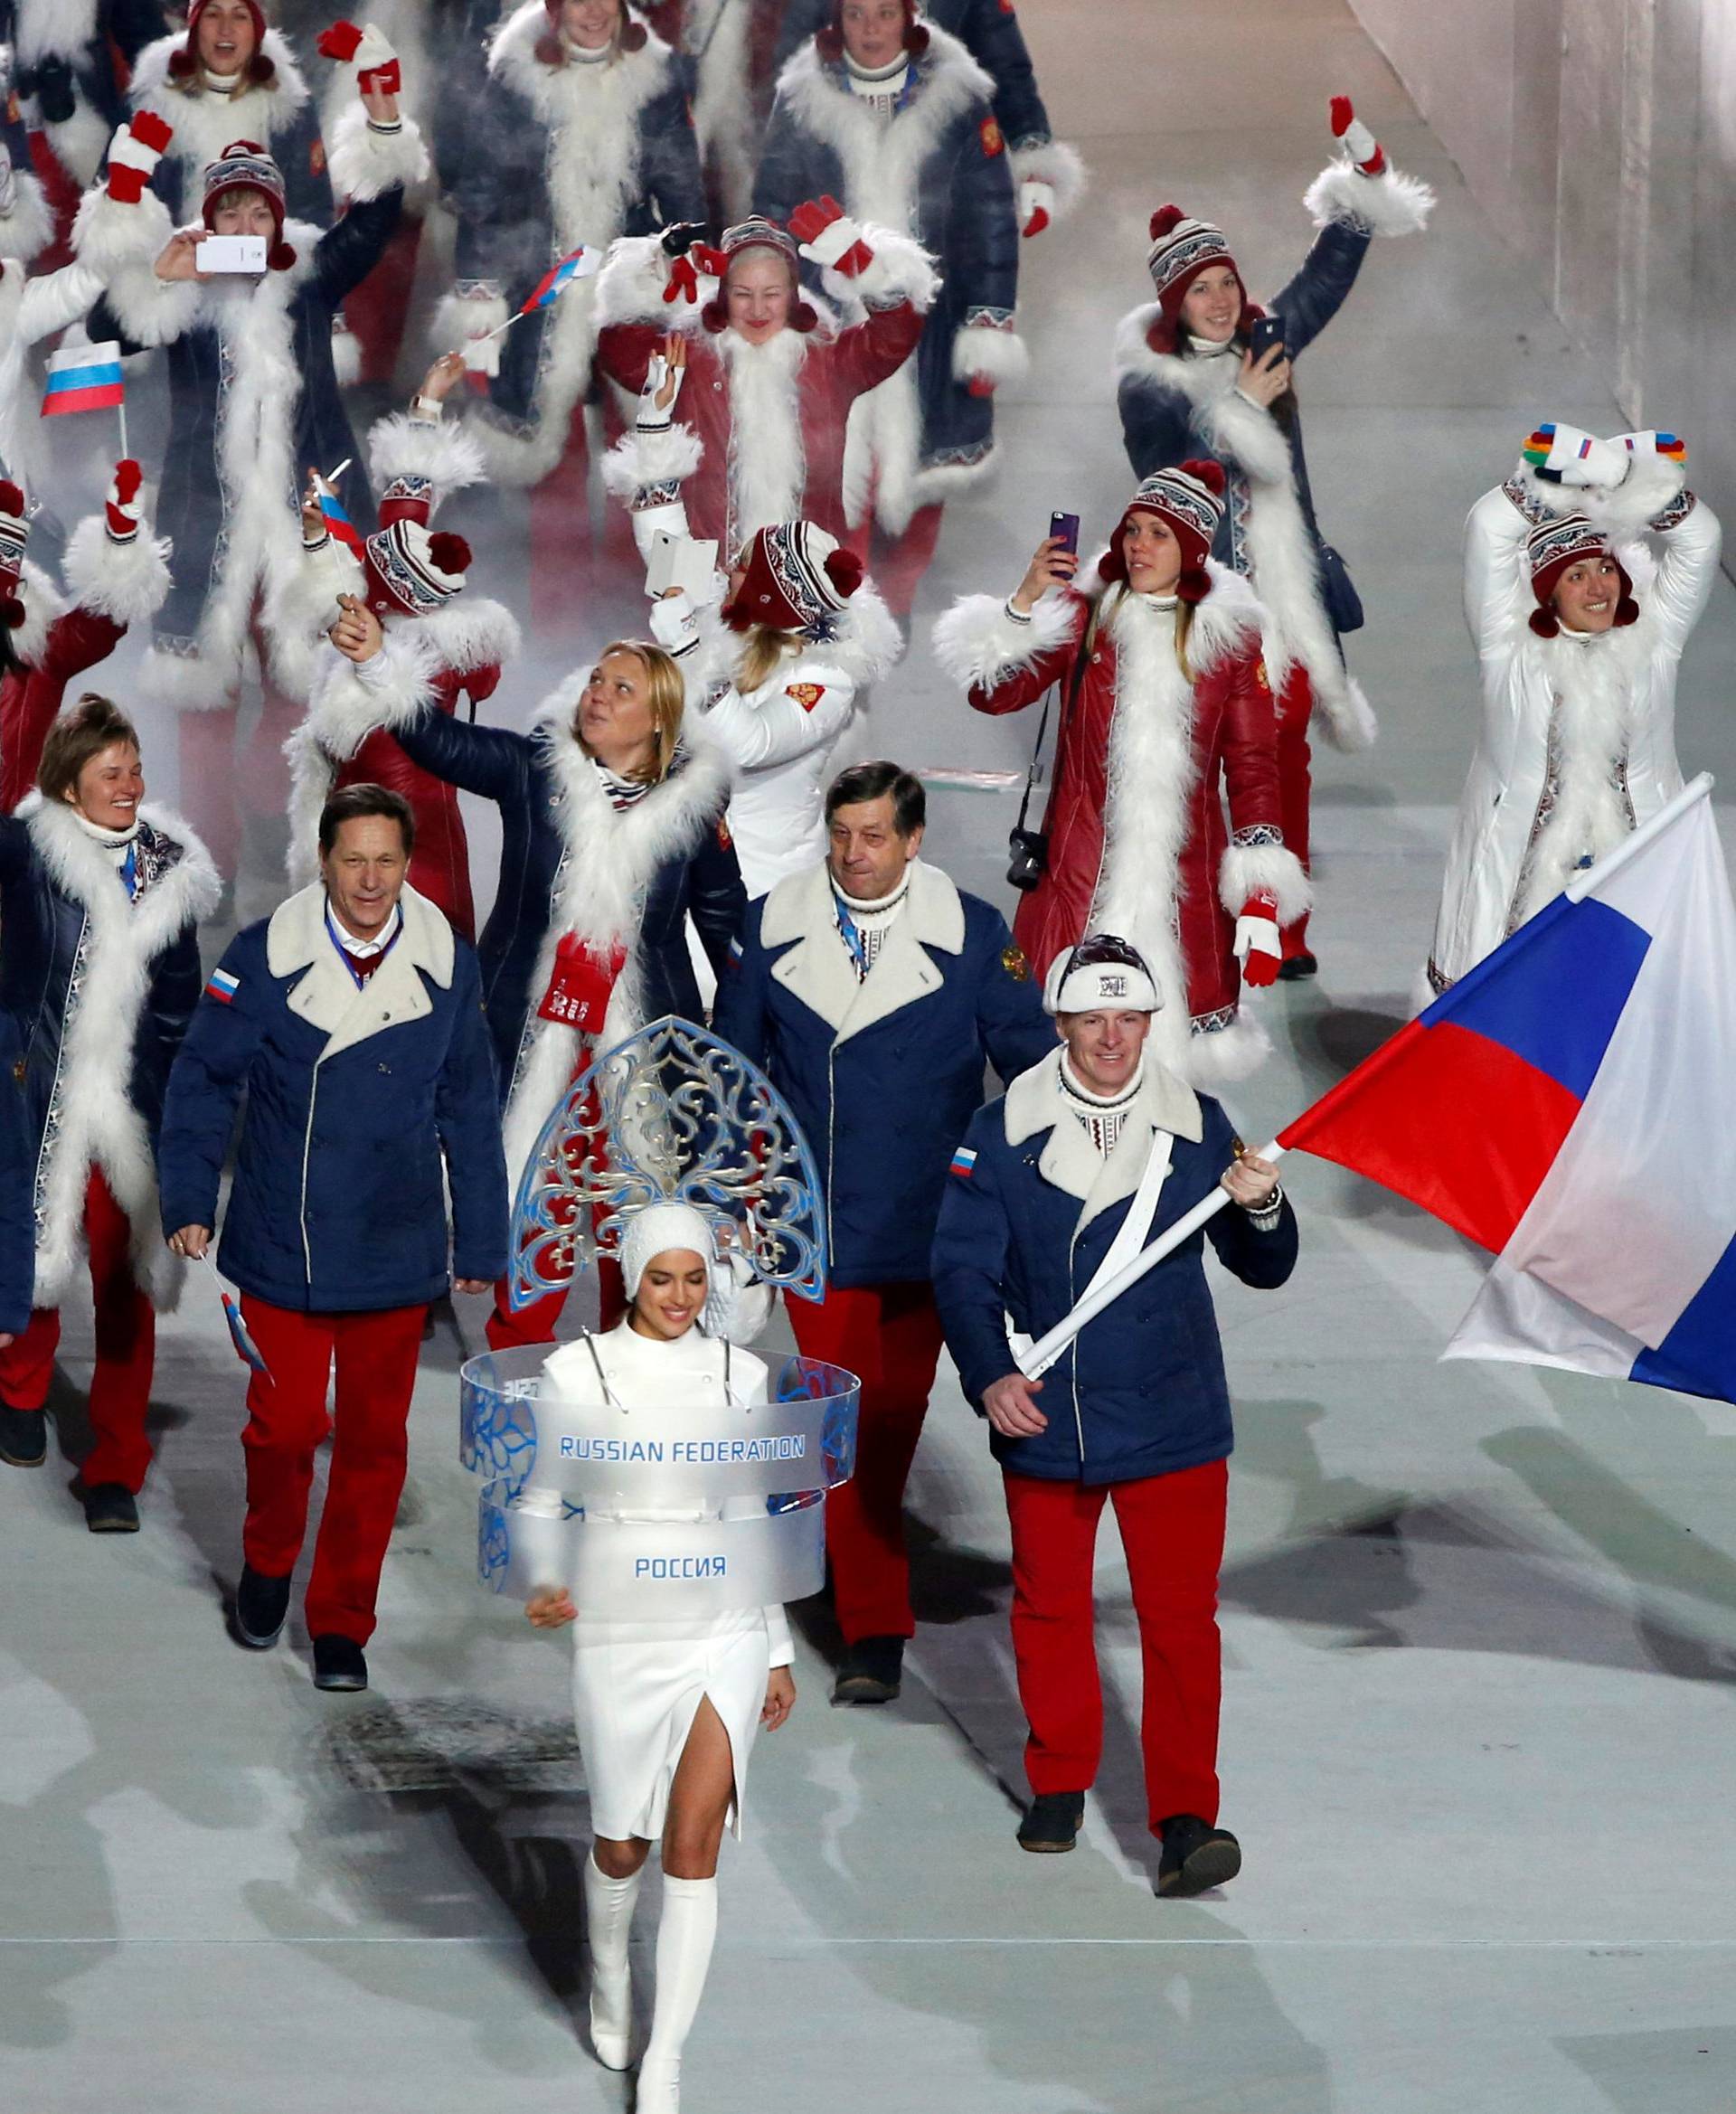 FILE PHOTO: Russia's flag-bearer Zubkov leads his country's contingent during the athletes' parade at the opening ceremony of the 2014 Sochi Winter Olympics